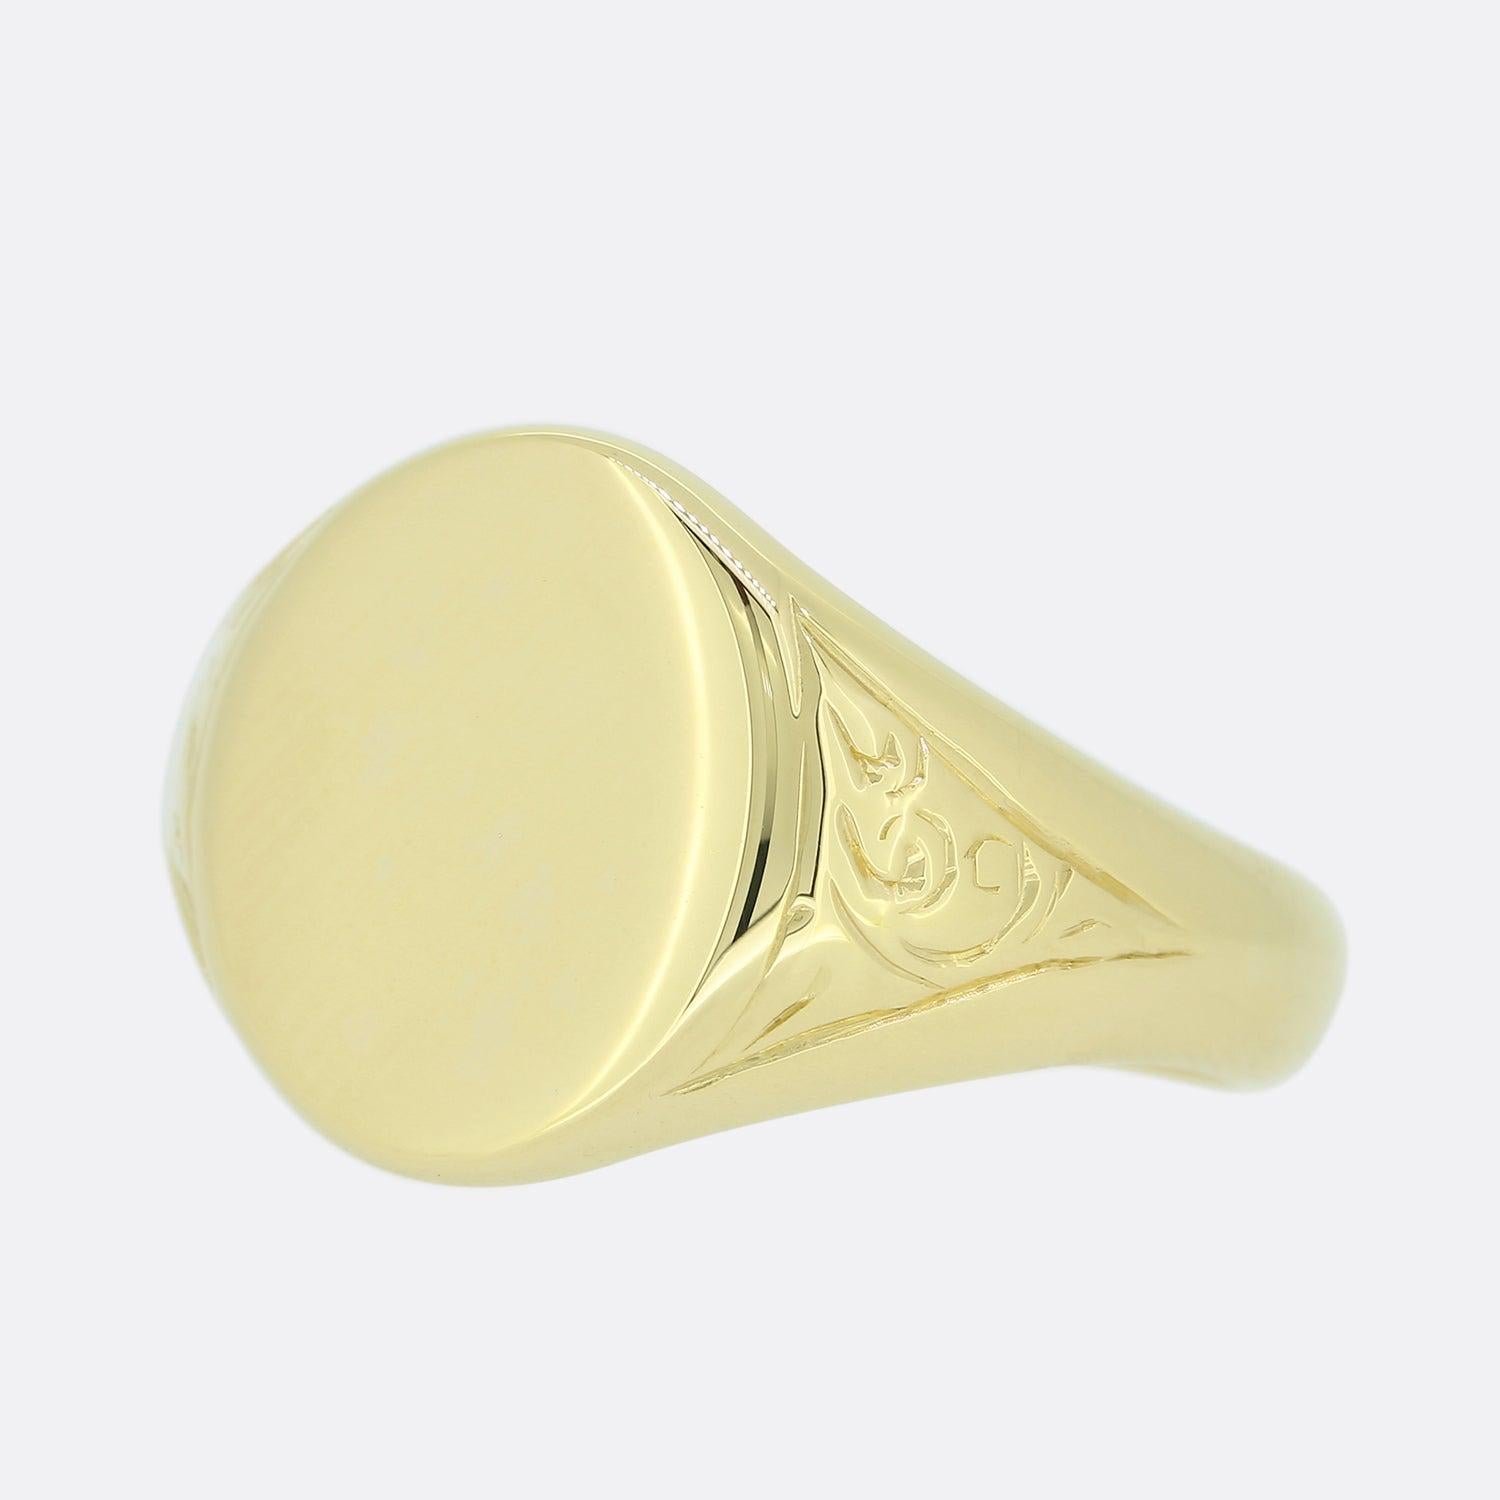 This is a Vintage 1950s 18ct yellow gold signet ring. The face of the ring is oval shaped and the ring has a plain polished finish.

Condition: Used (Very Good)
Weight: 9.2 grams
Ring Size: Q
Face Dimensions: 14mm x 12mm
Hallmarked: Yes, London